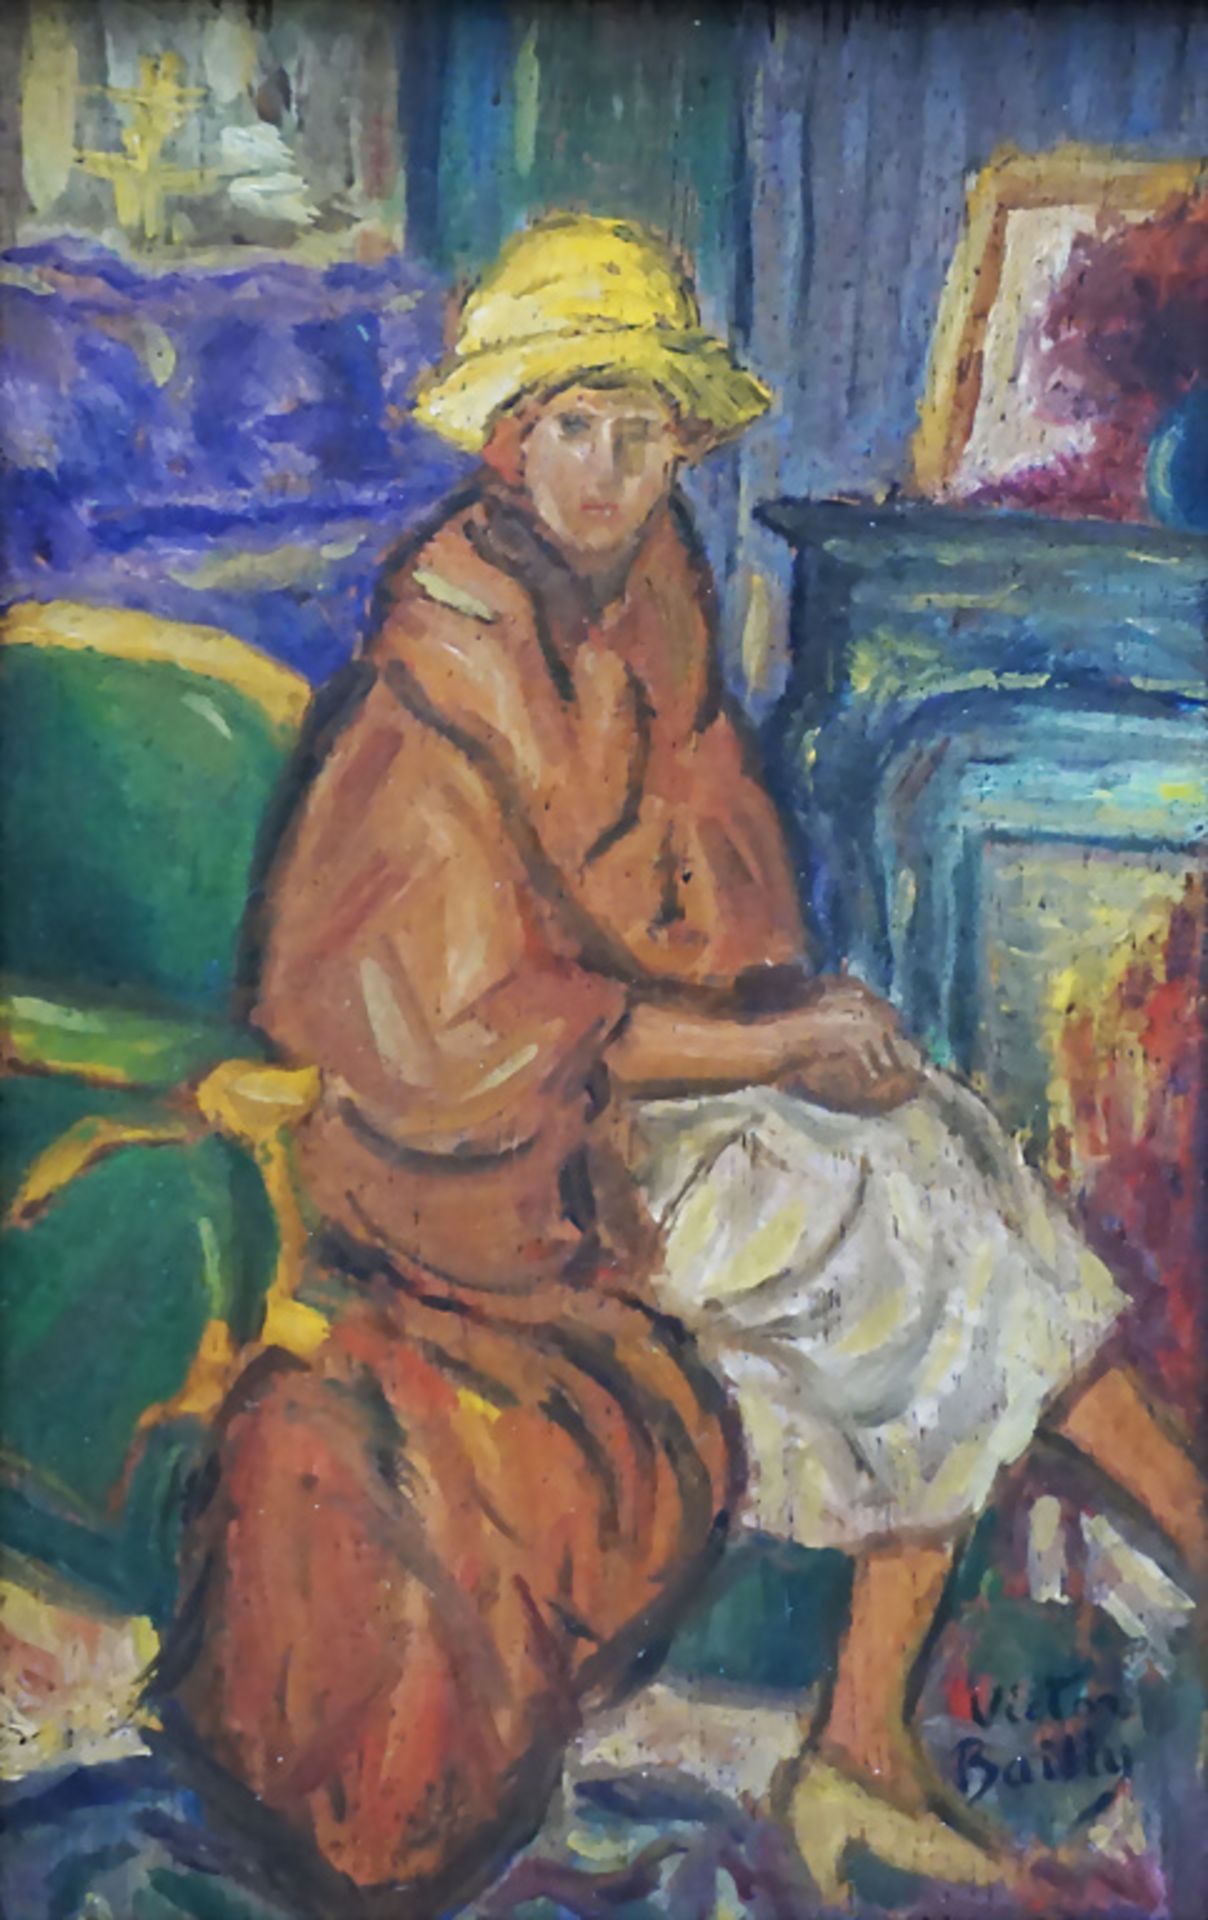 Victor Bailly, 'Frau mit gelbem Hut' / 'A lady with a yellow hat', 20. Jh.